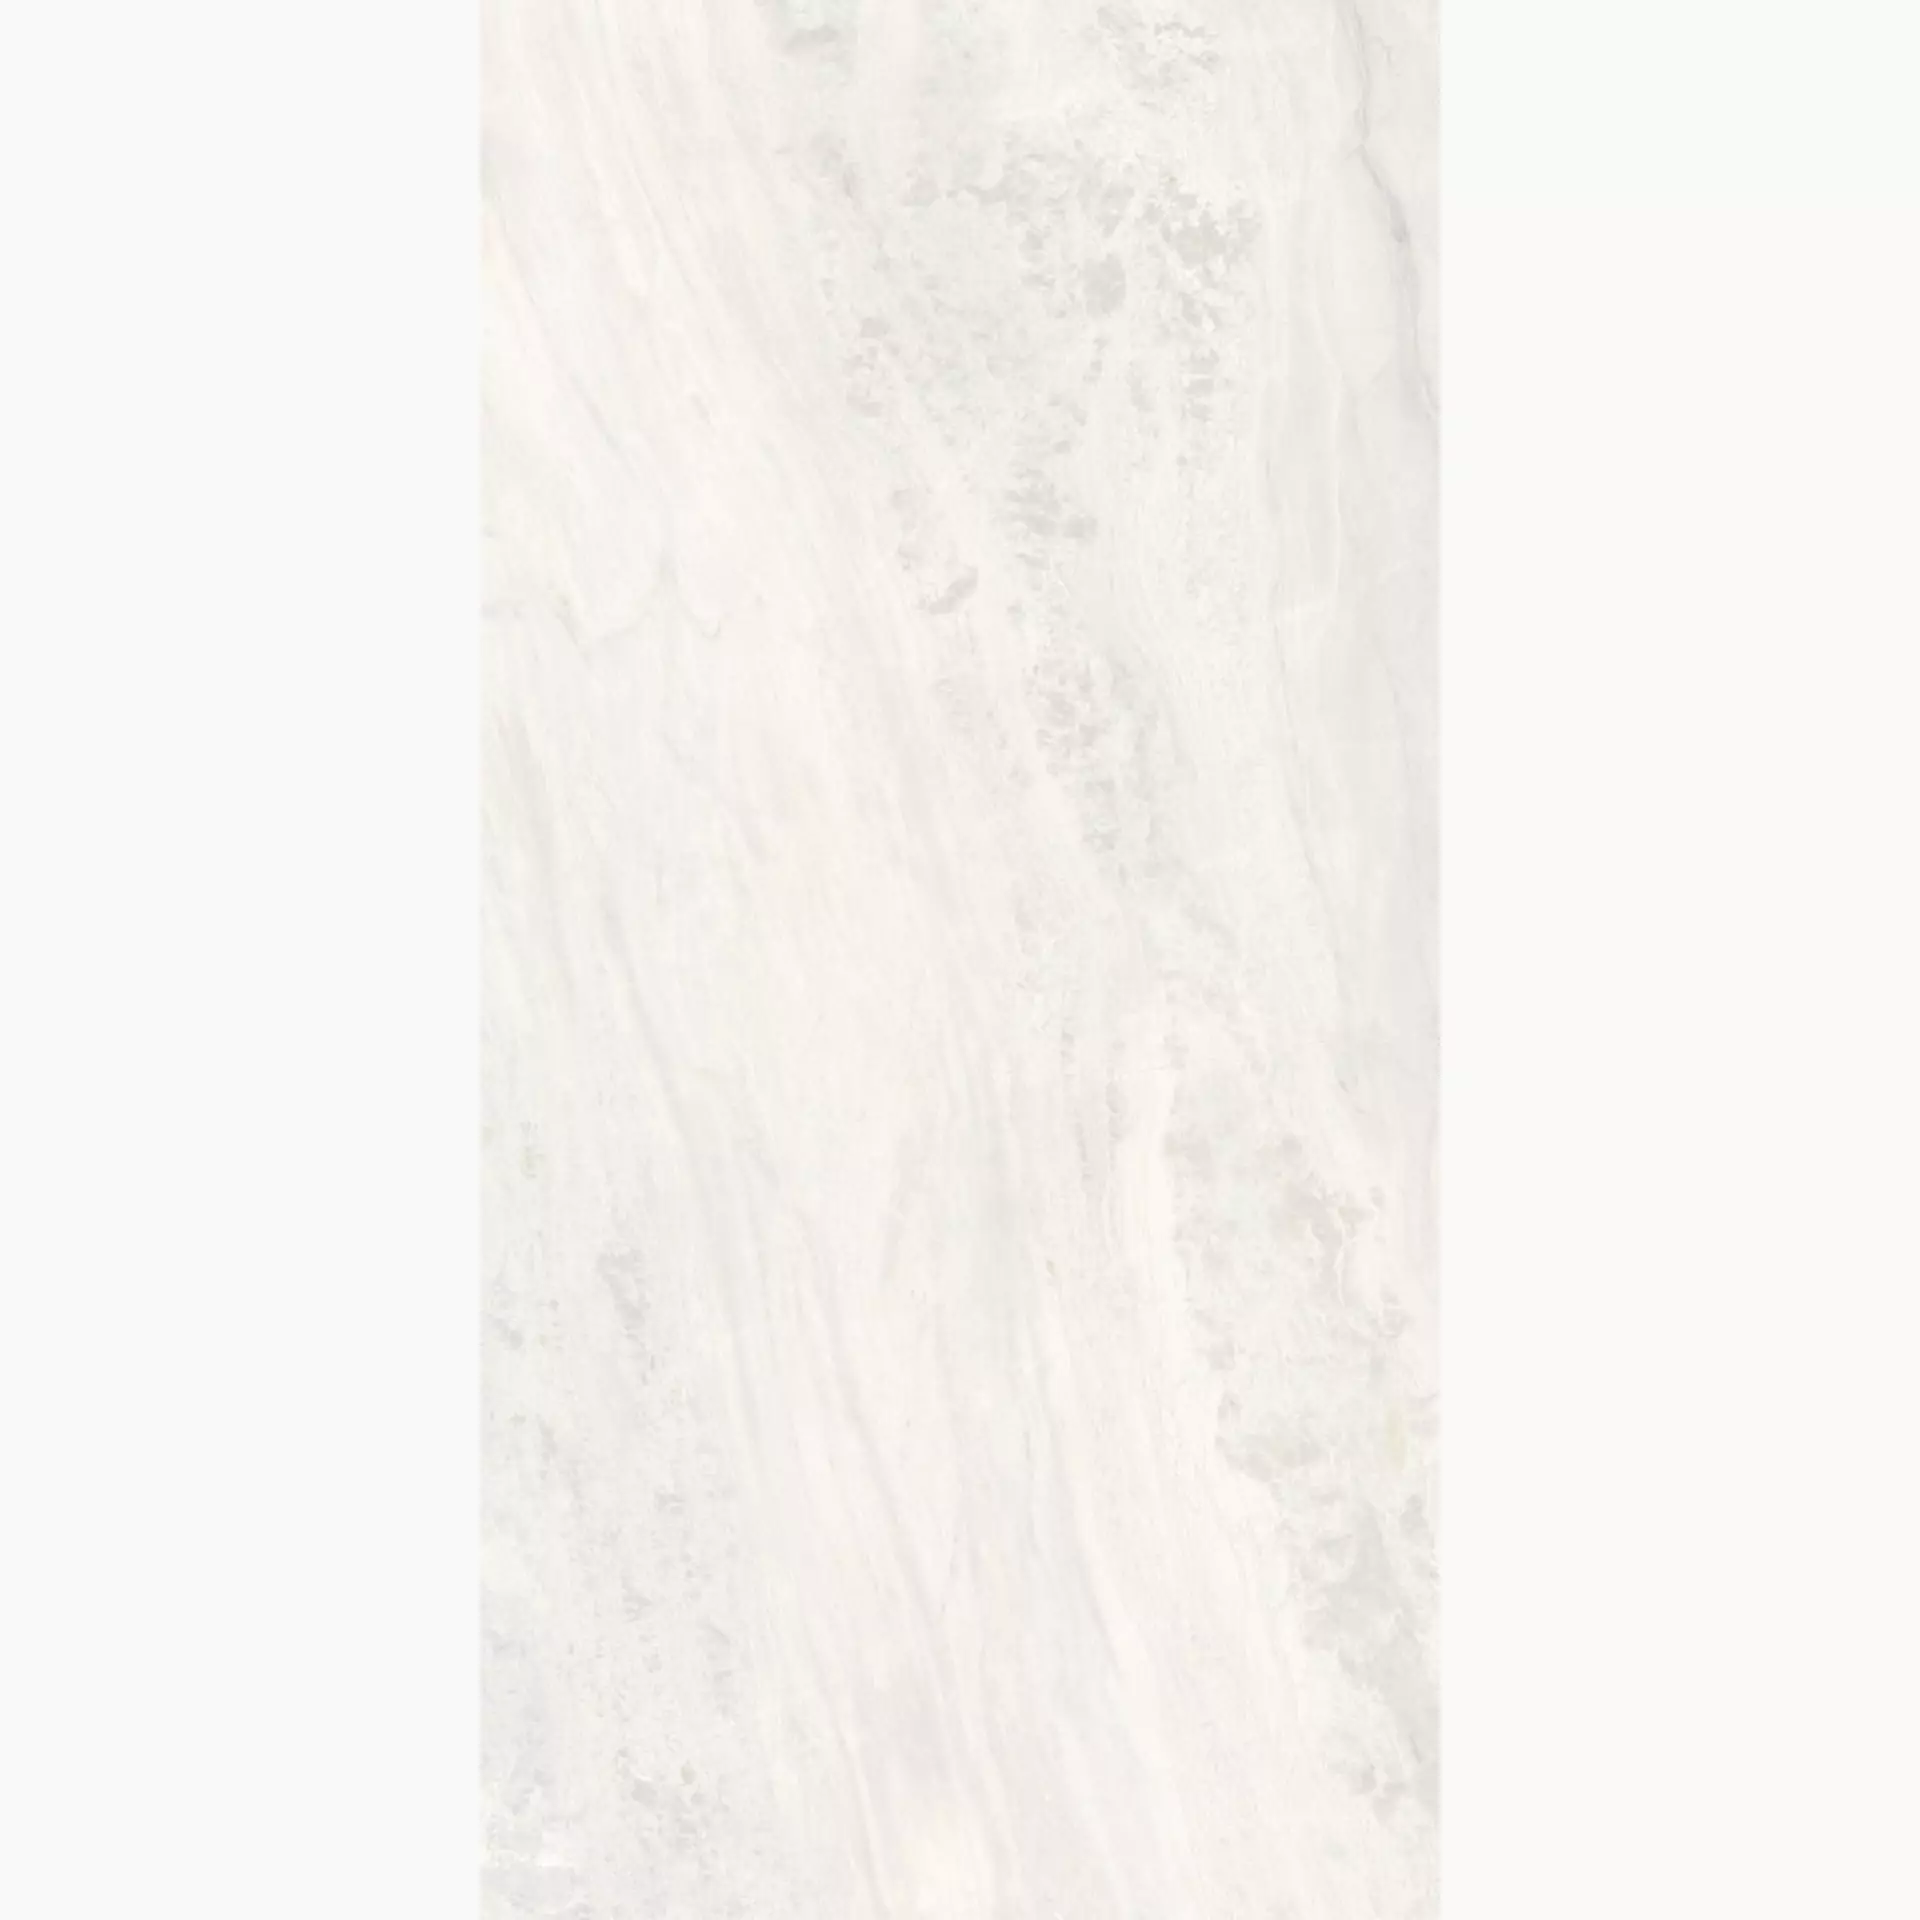 Sant Agostino Paradiso Ice Natural CSAPICE612 60x120cm rectified 9mm